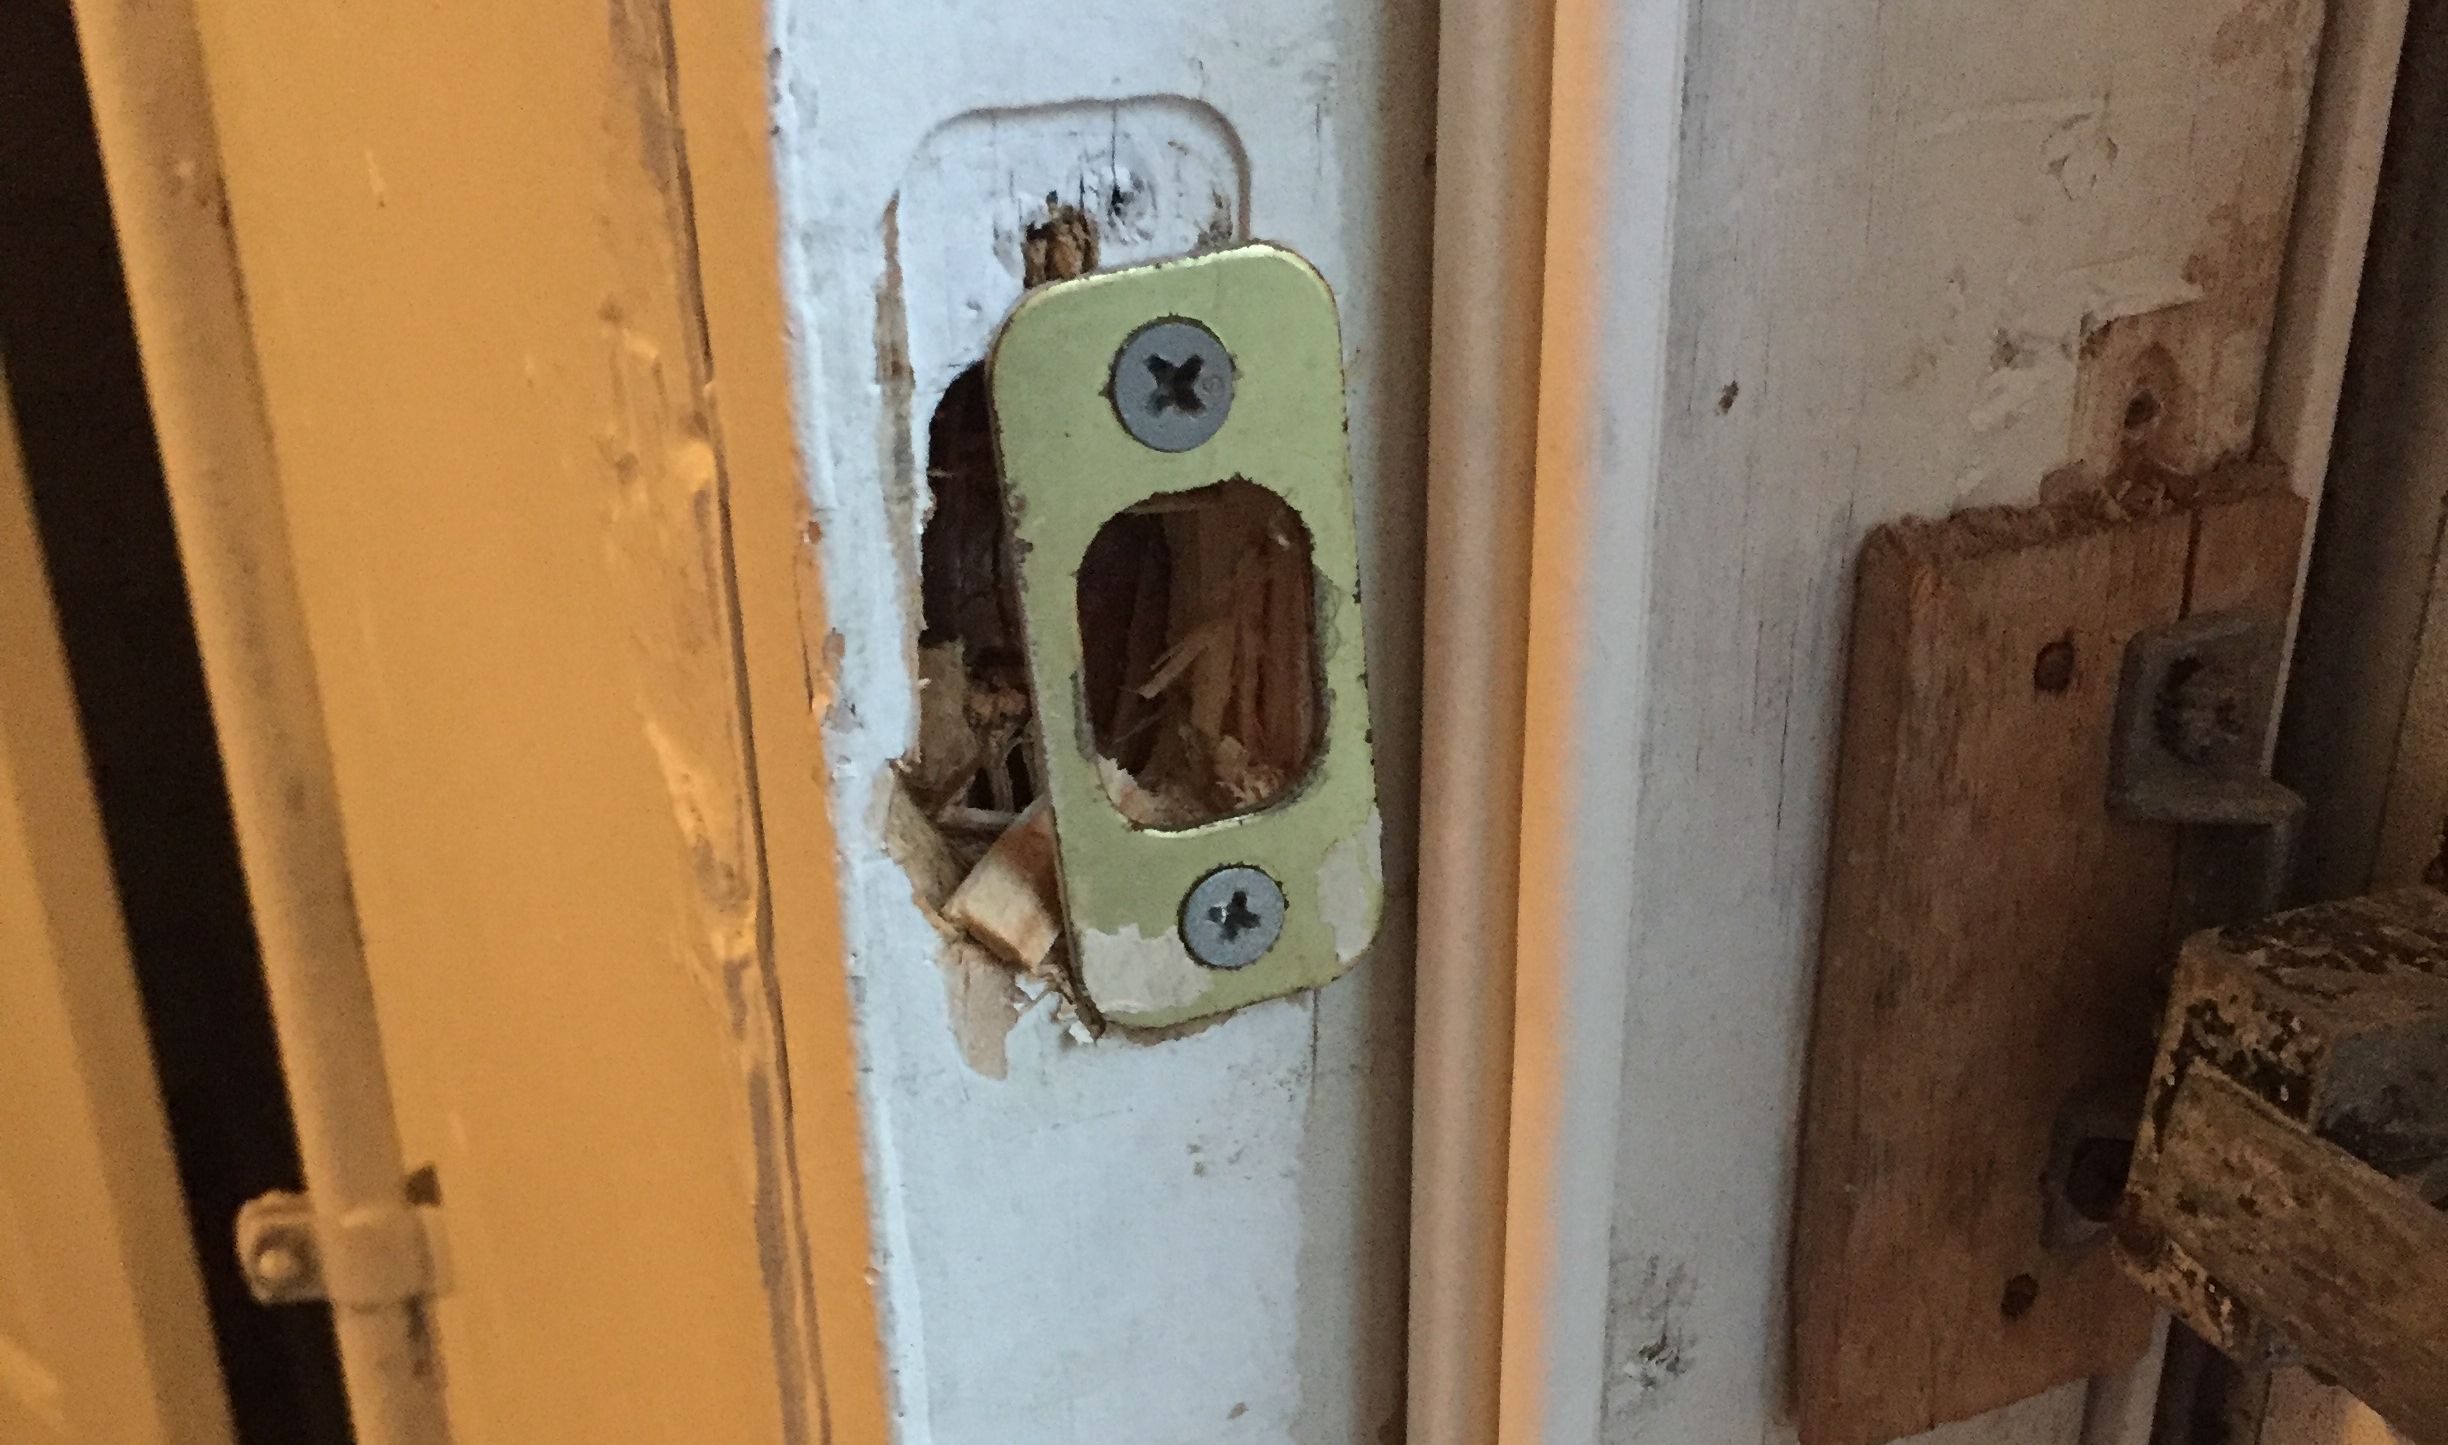 The broken lock to our home